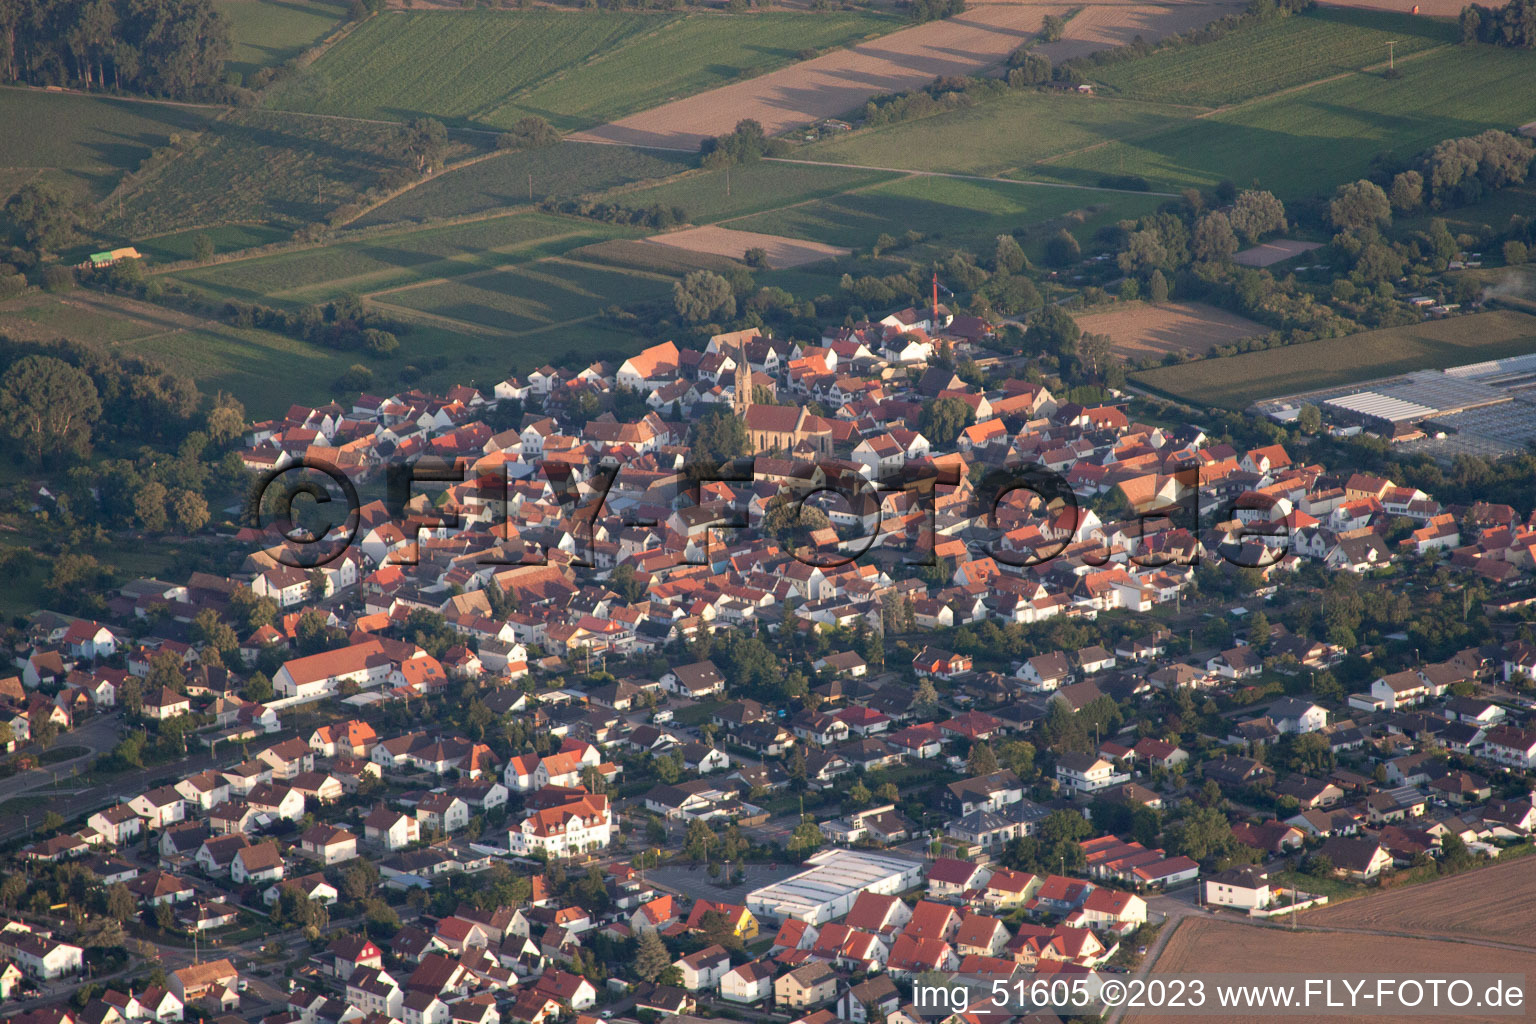 Germersheim in the state Rhineland-Palatinate, Germany from above